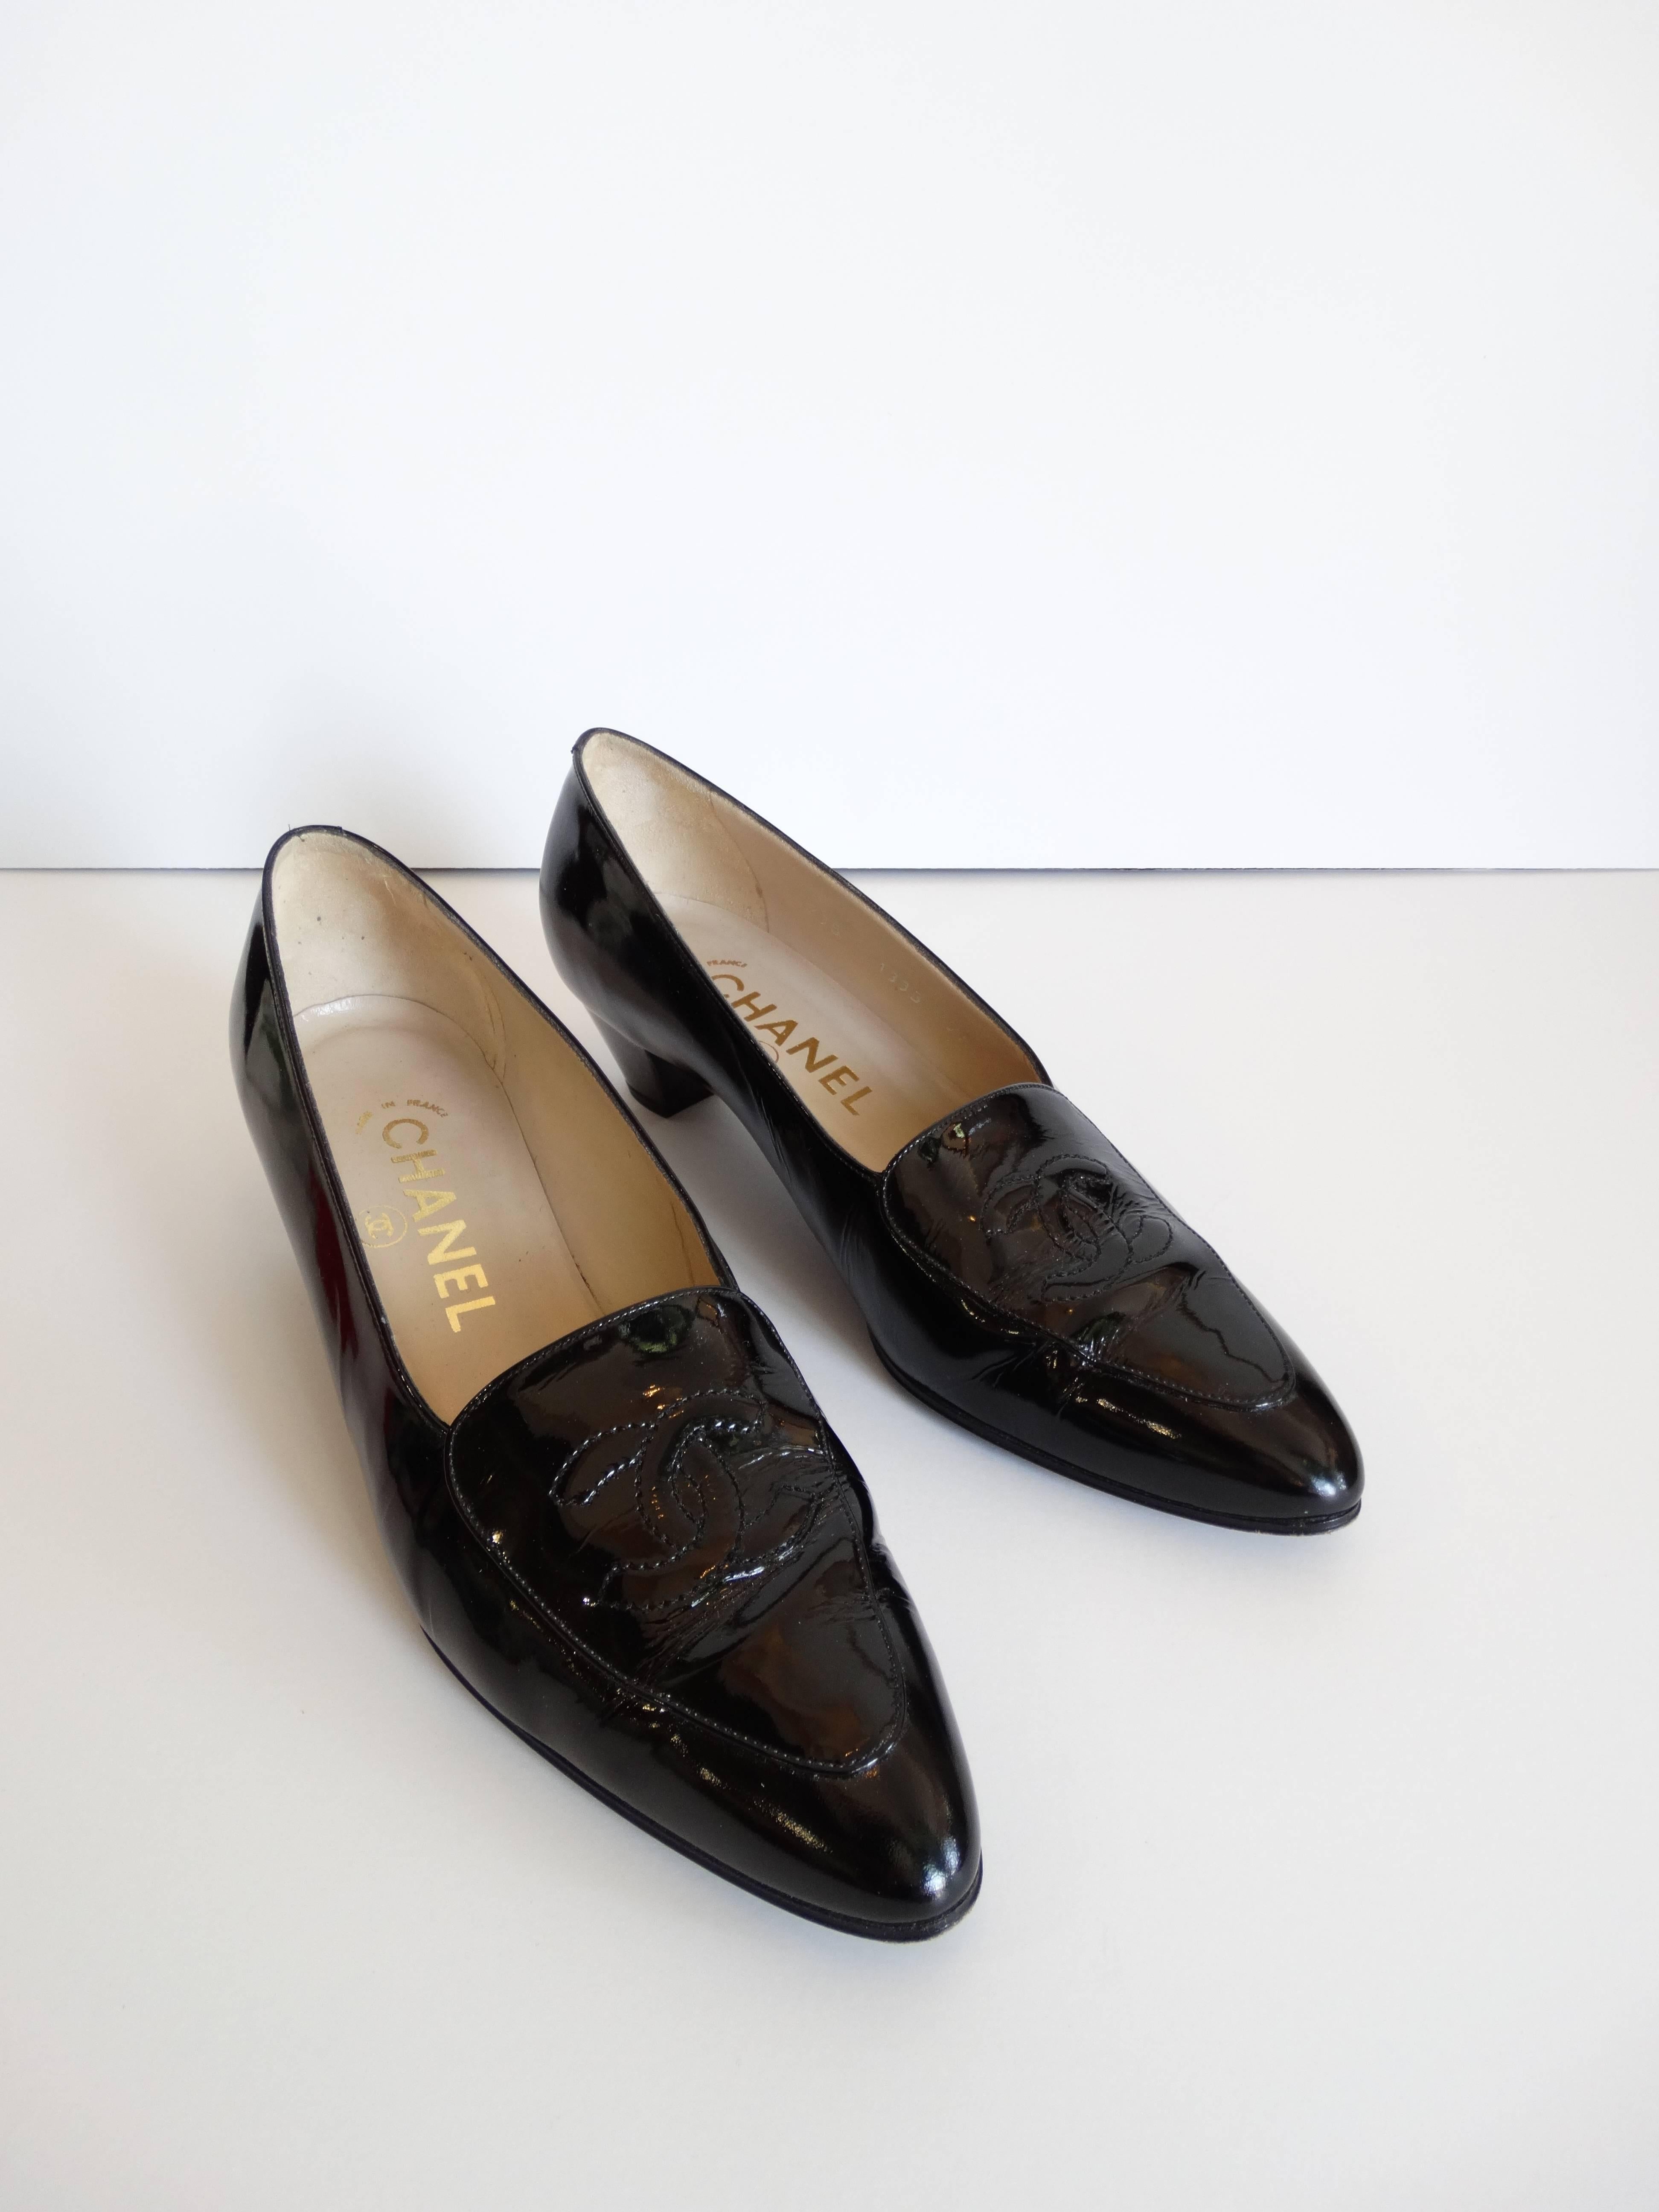 Incredible pair of 1990s Chanel black patent kitten heel loafers! Short kitten heel with pointed toe. Signature Chanel logo stitched atop the toe. Marked a size 37. Light scuffs on the bottoms, as pictured. 10 1/2 inches from toe to heel. Made in